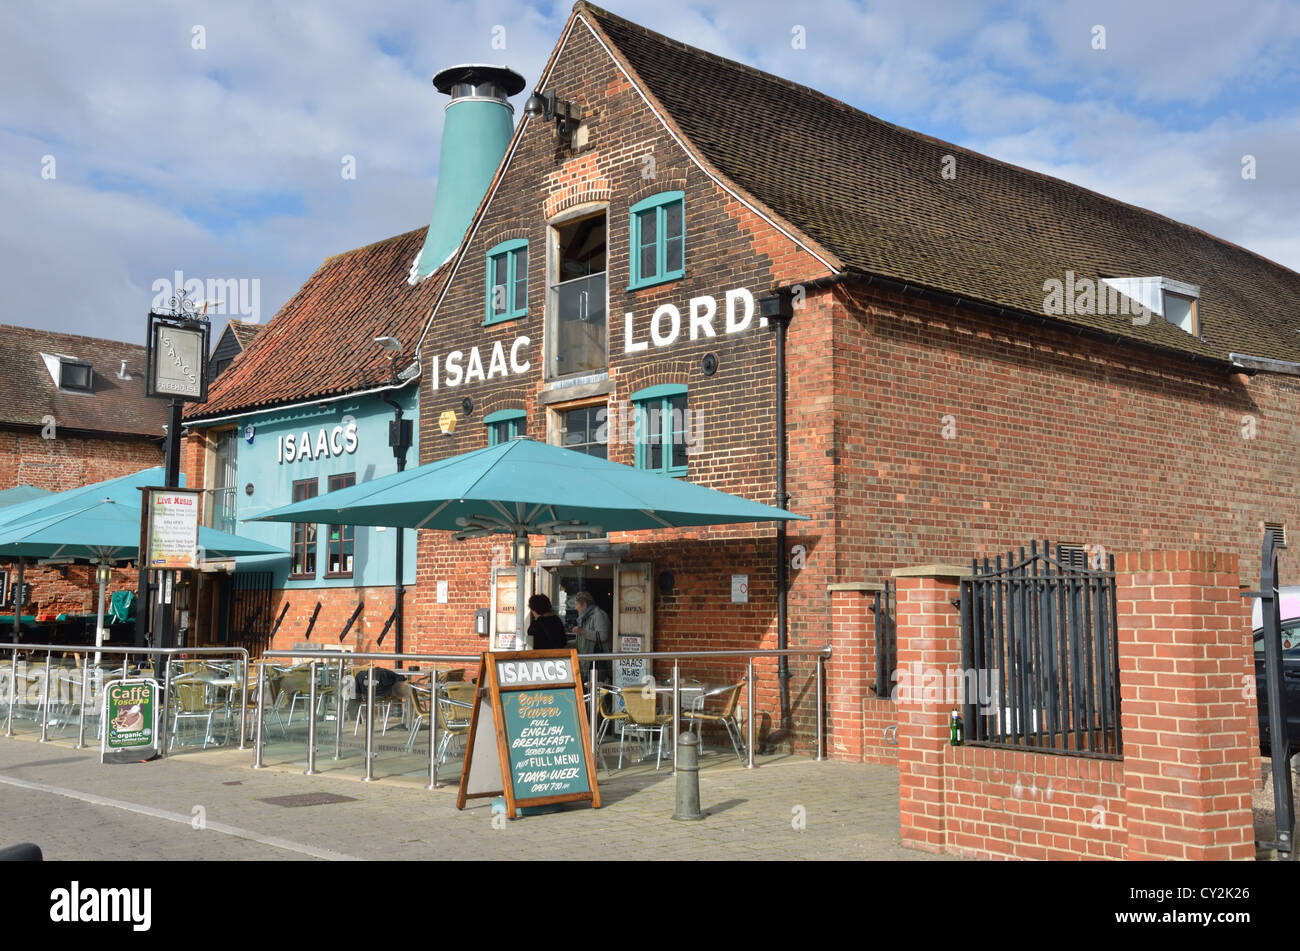 isaac lord cafe ipswich suffolk Stock Photo